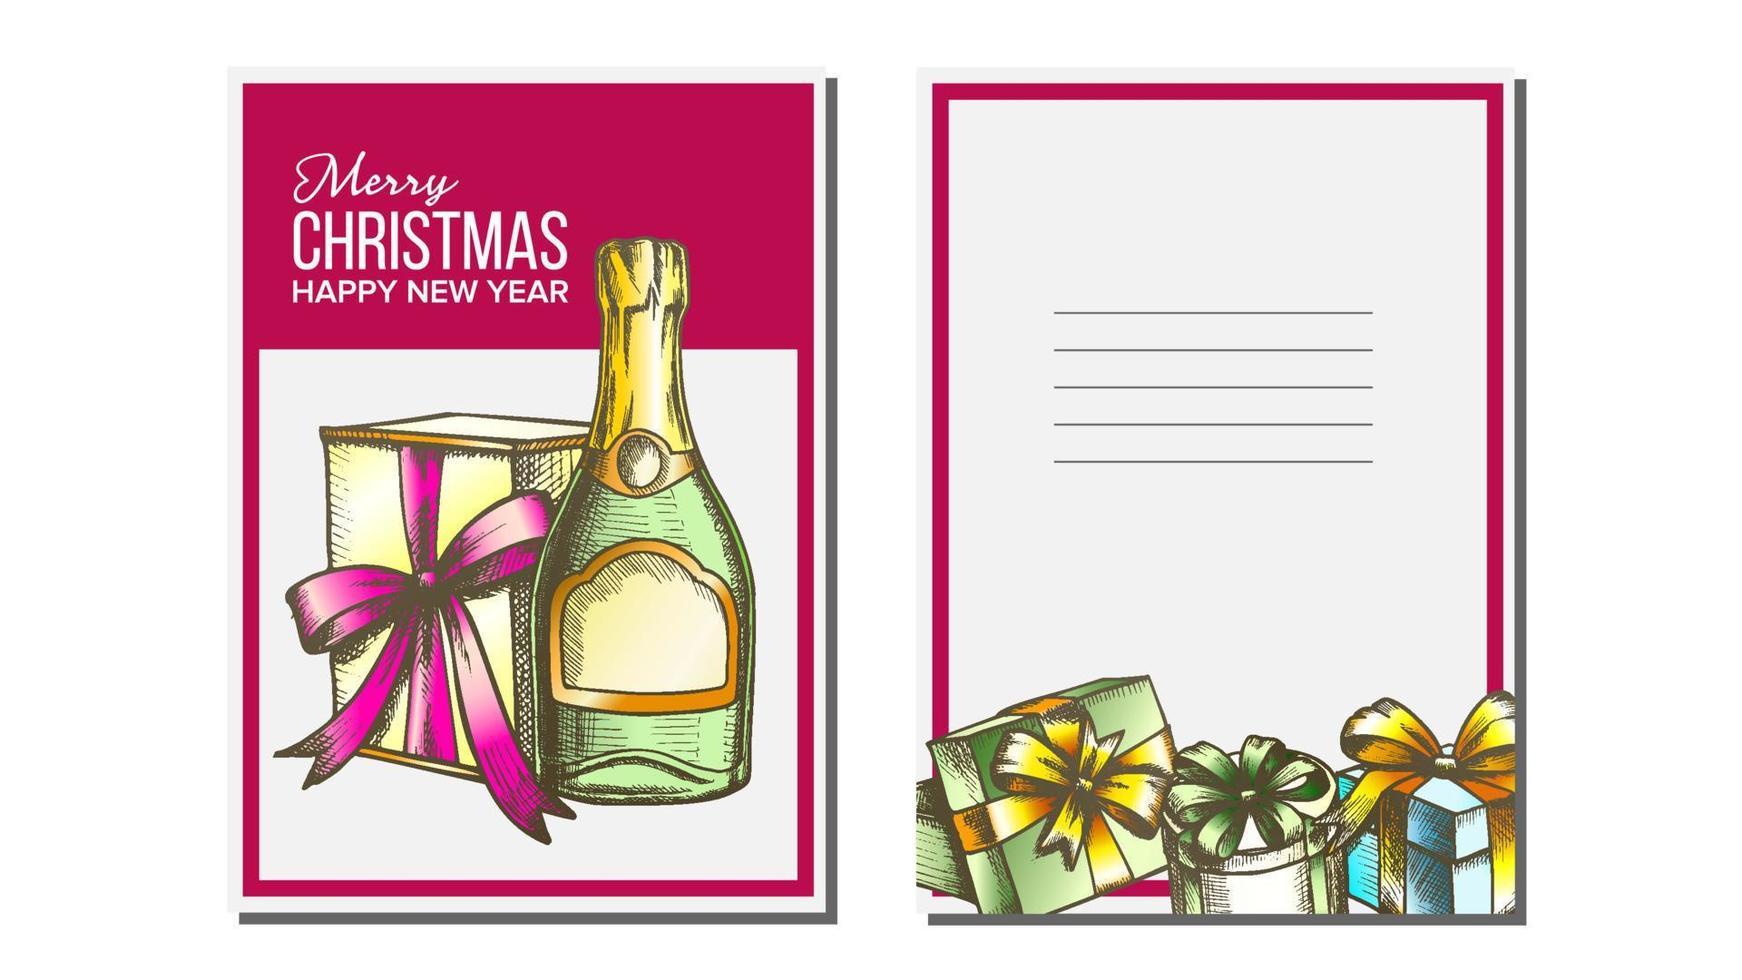 Christmas Greeting Card Vector. Champagne Bottle. Seasons. Winter Wishes. Holiday Concept. Hand Drawn In Vintage Style Illustration vector